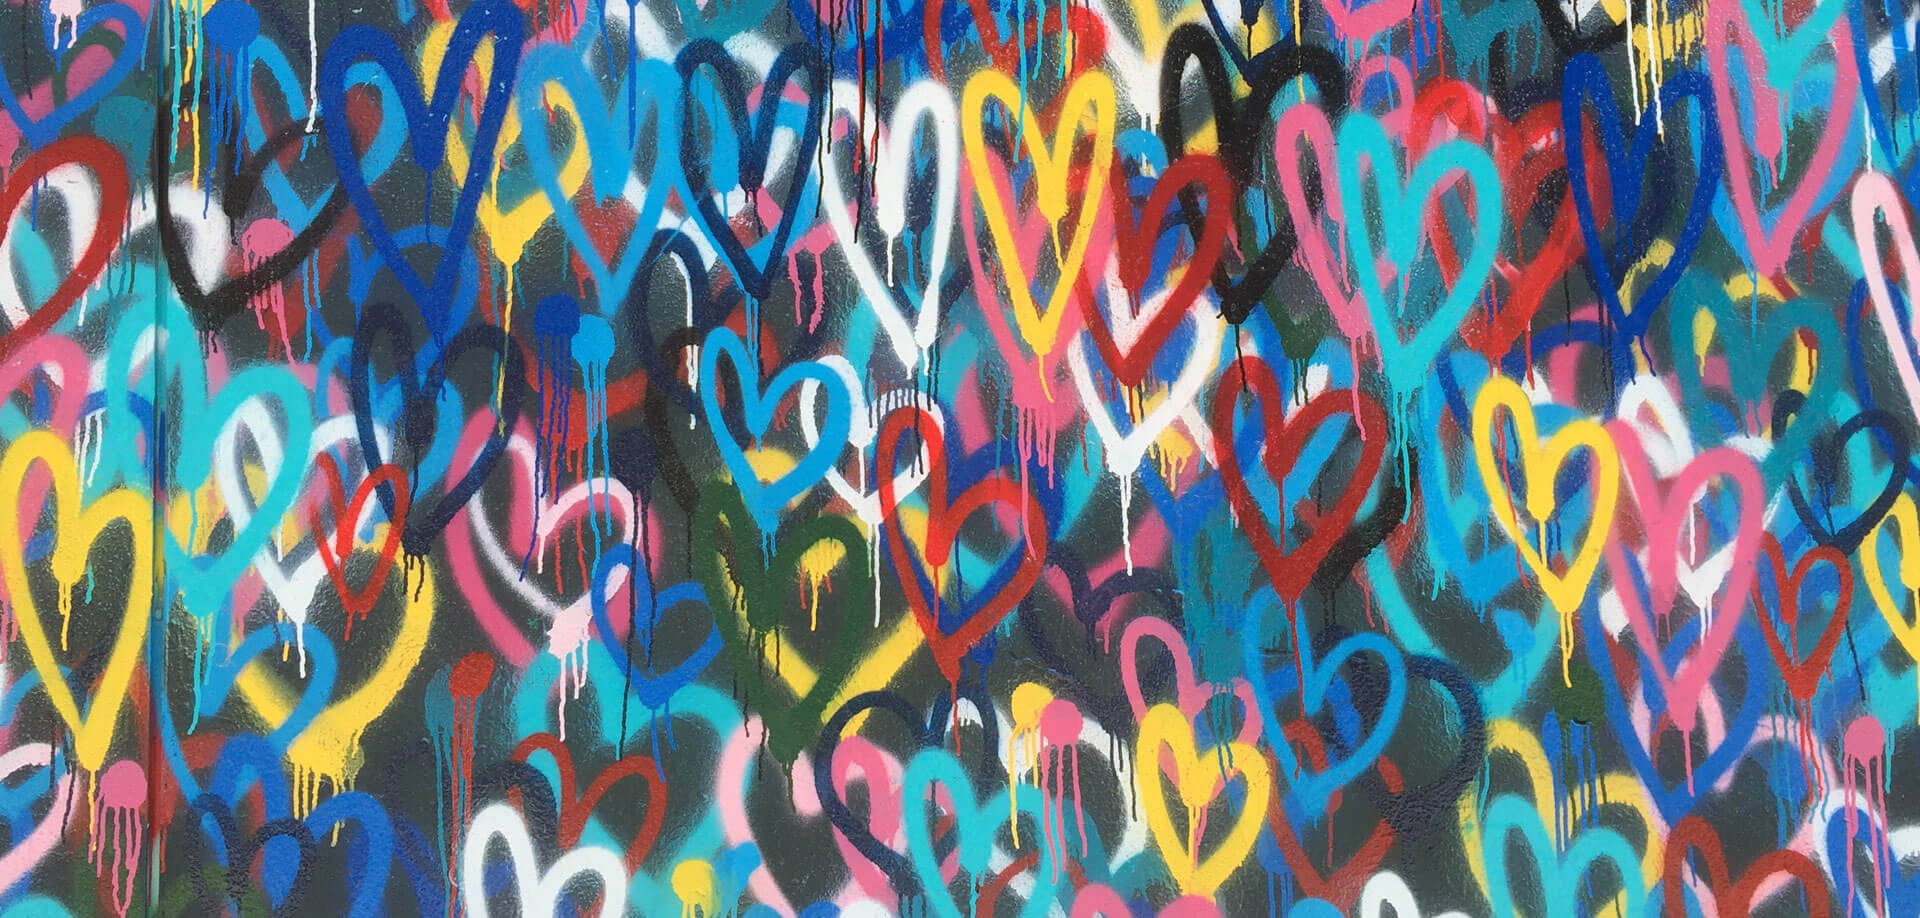 image of wall with hearts spray-painted 